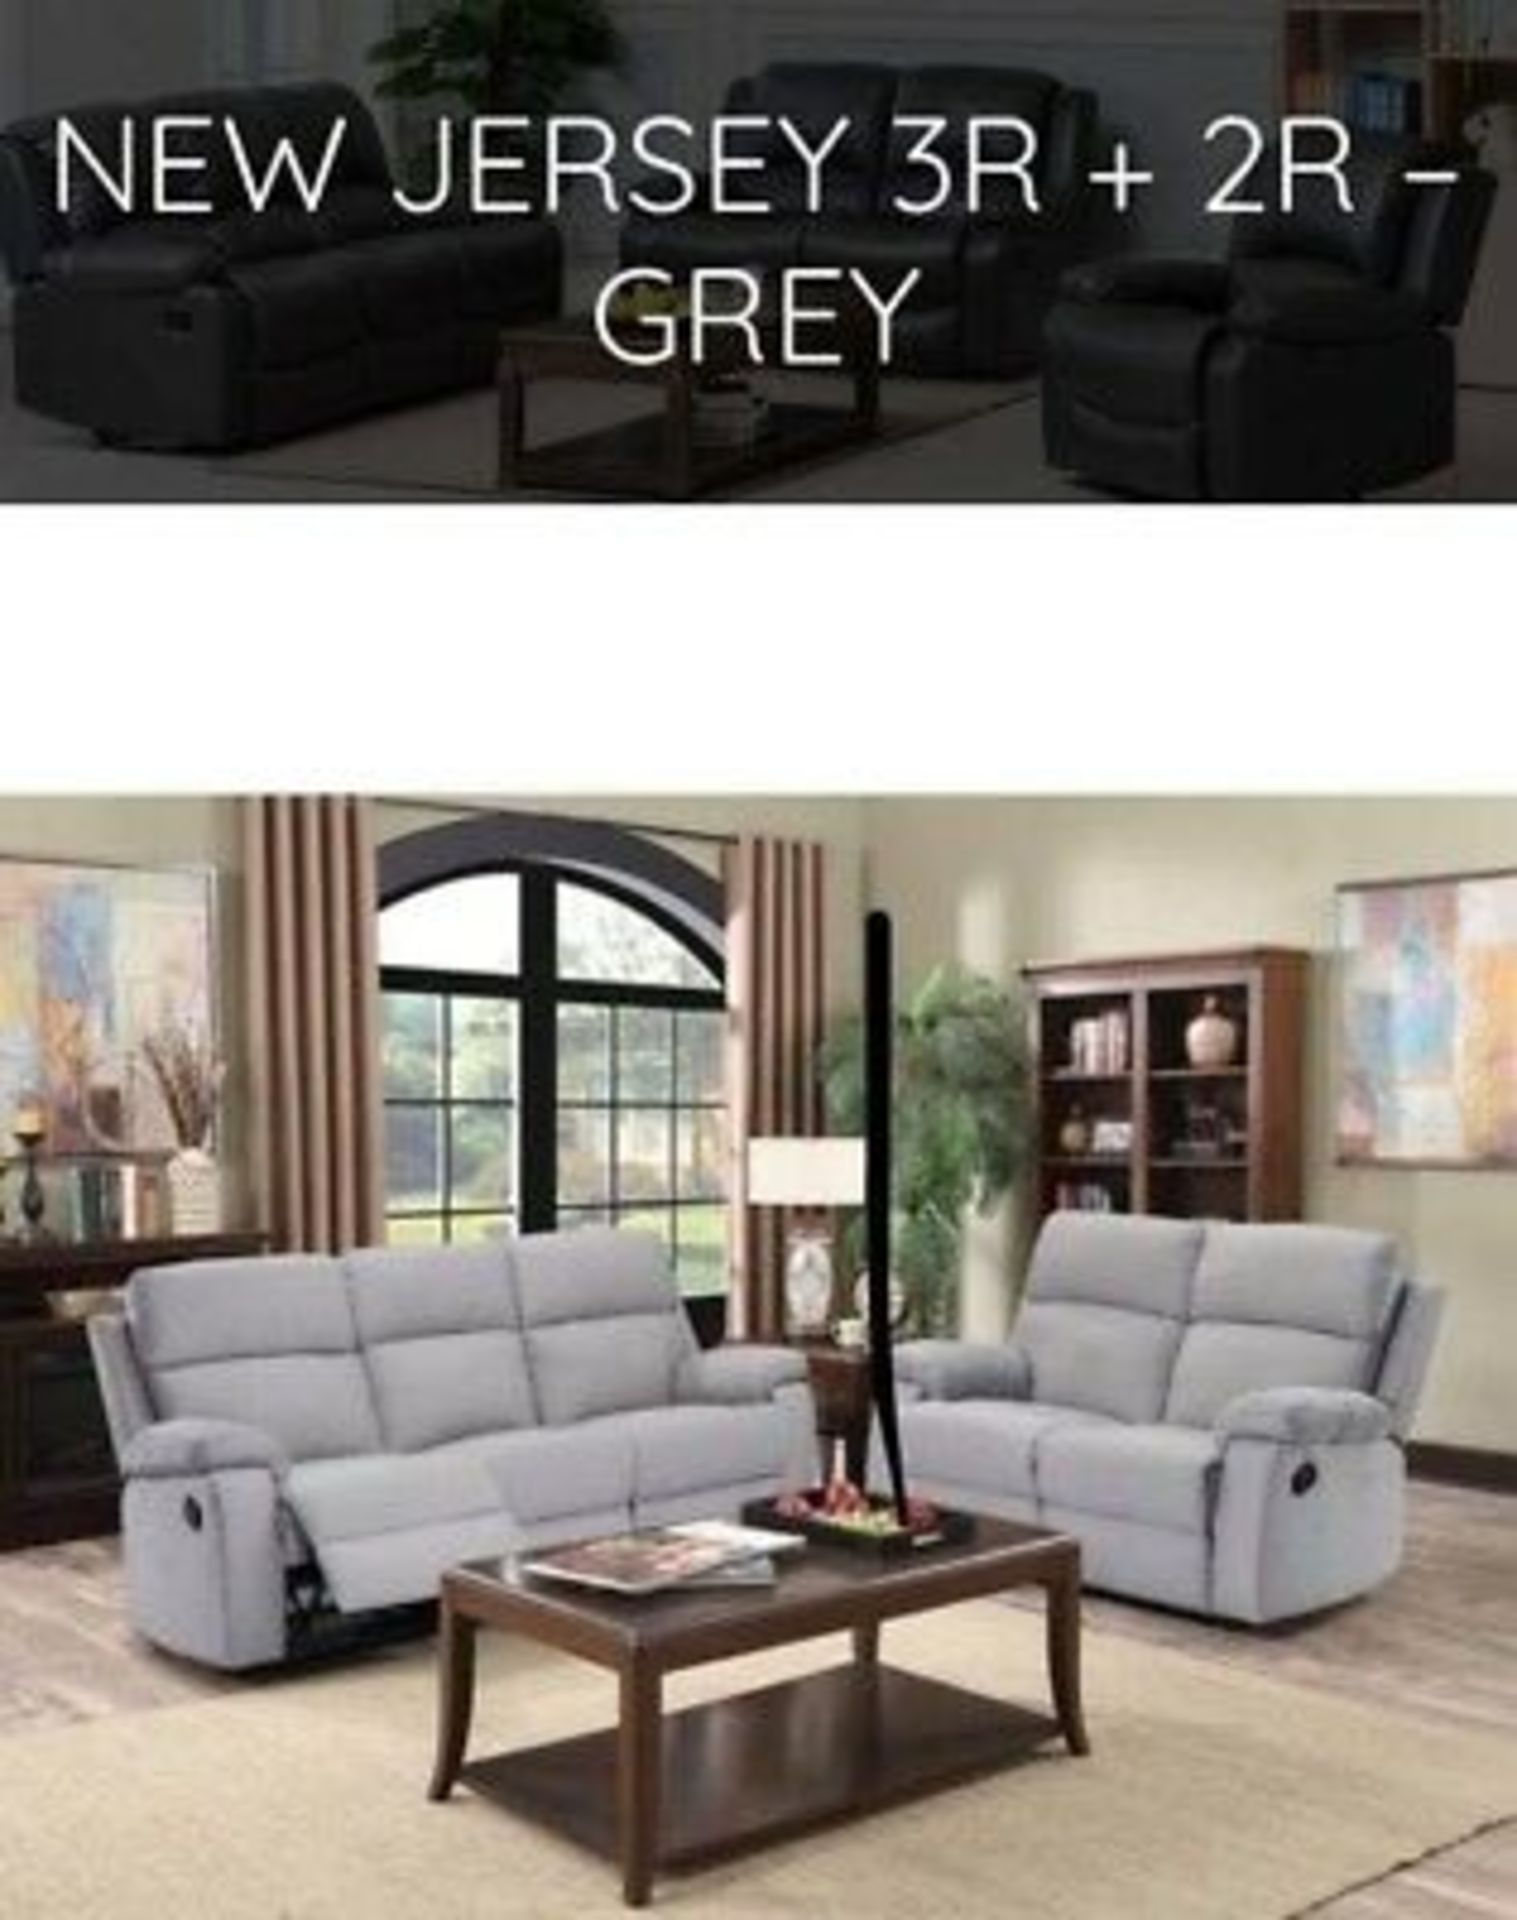 Brand New Boxed 3 Seater Plus 2 Seater New Jersey Reclining Sofas In Light Grey Fabric